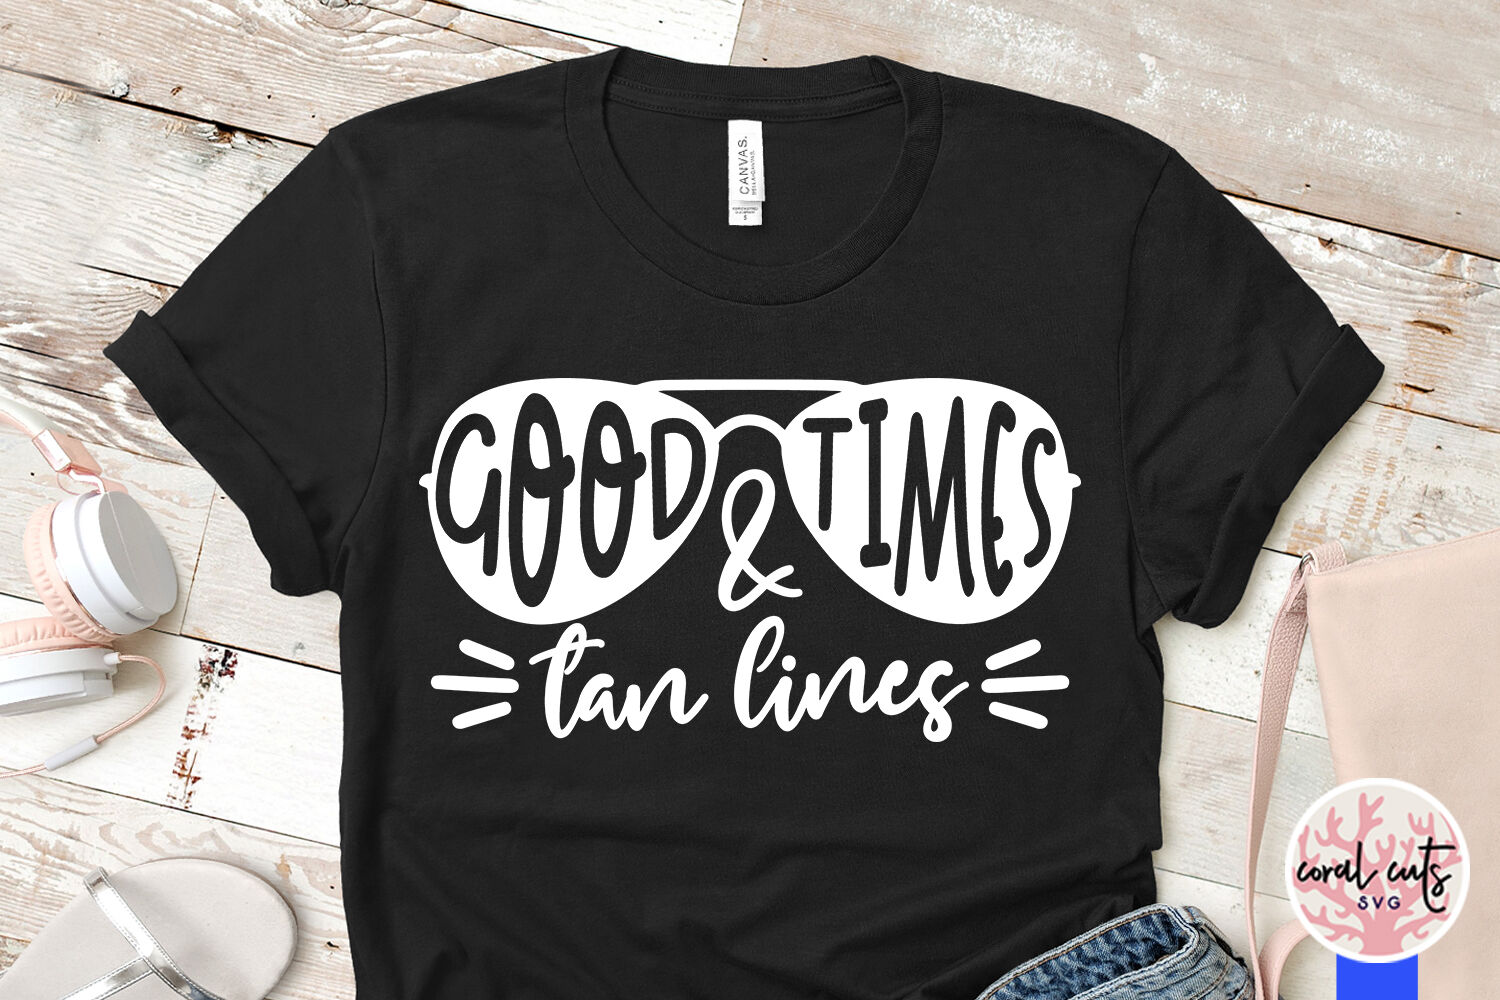 Good times and tan lines - Summer SVG EPS DXF PNG Cut File By CoralCuts ...